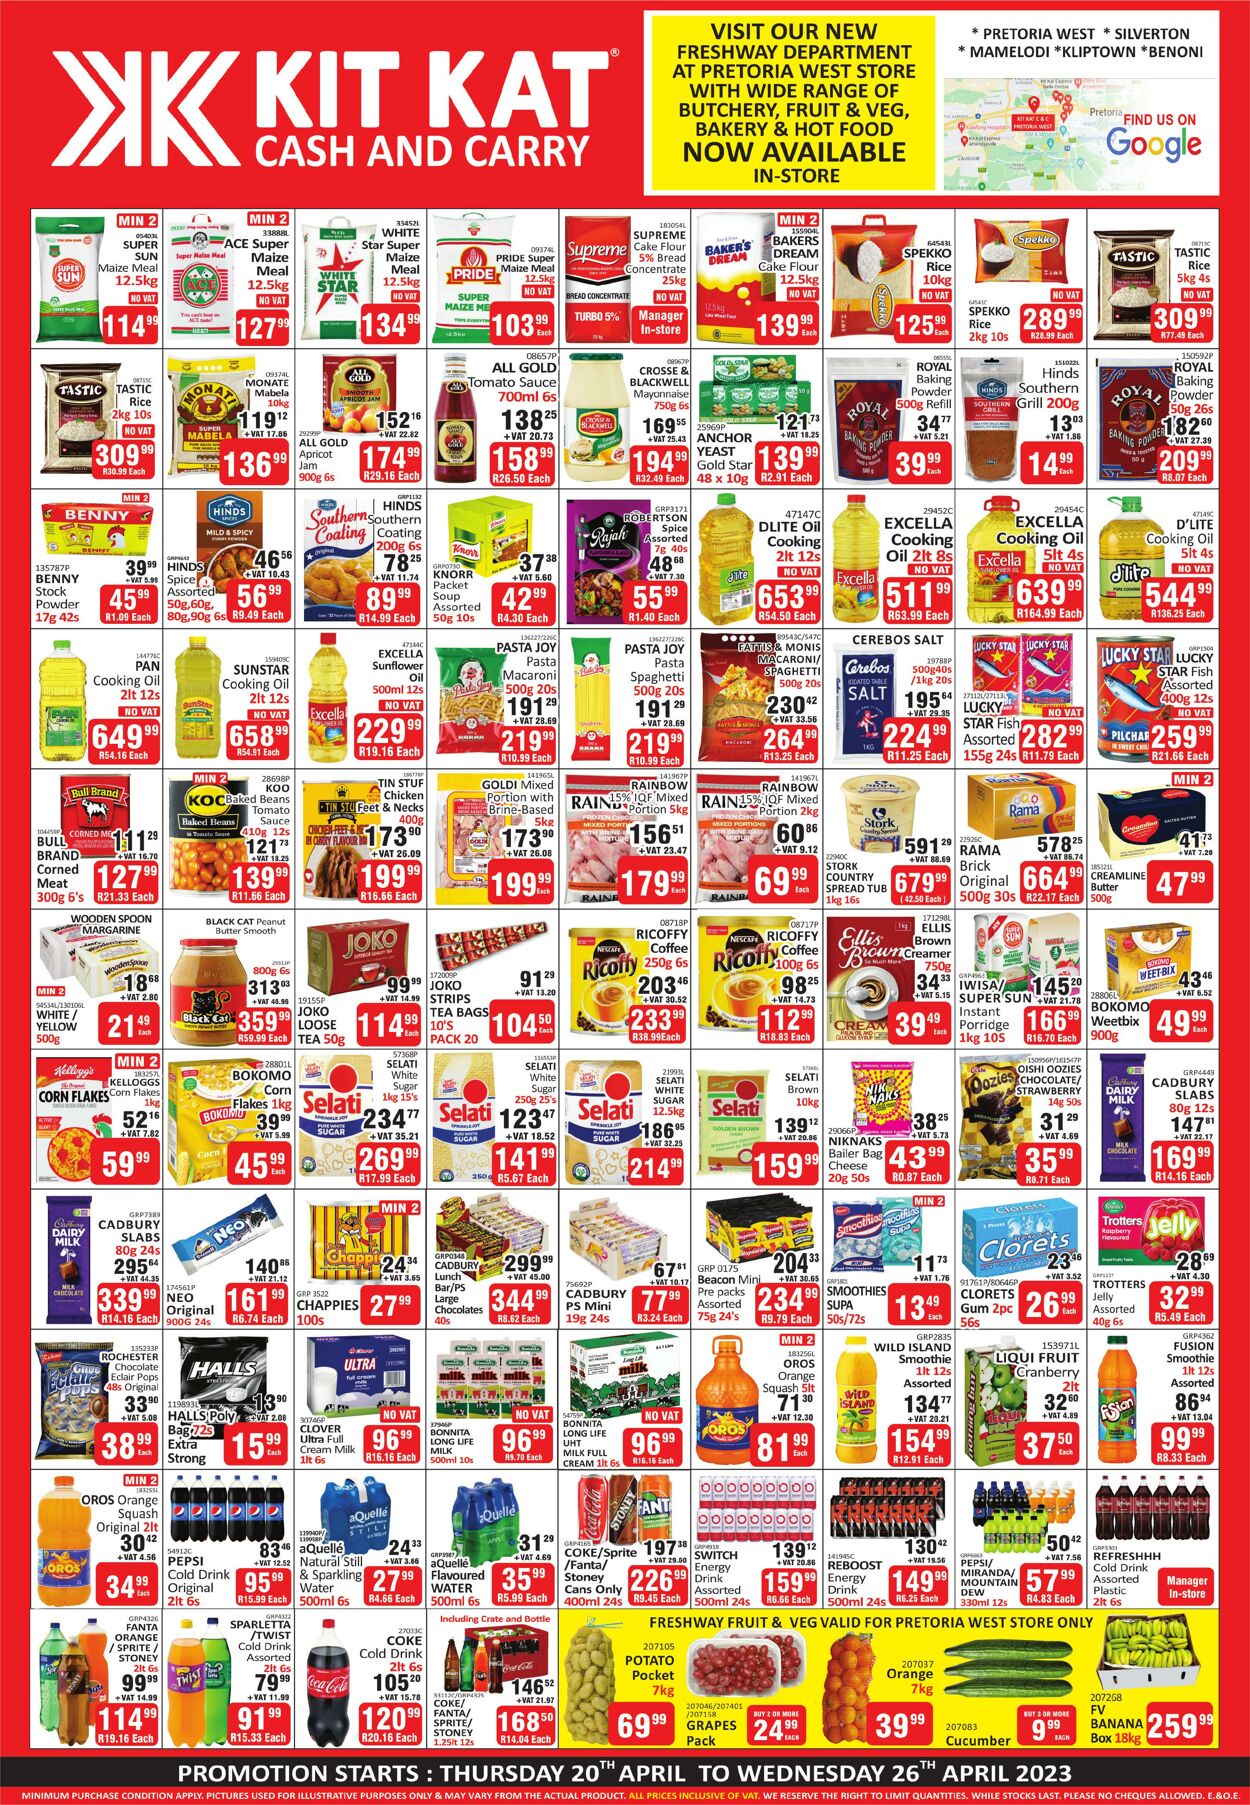 Special Kit Kat Cash and Carry 20.04.2023 - 26.04.2023